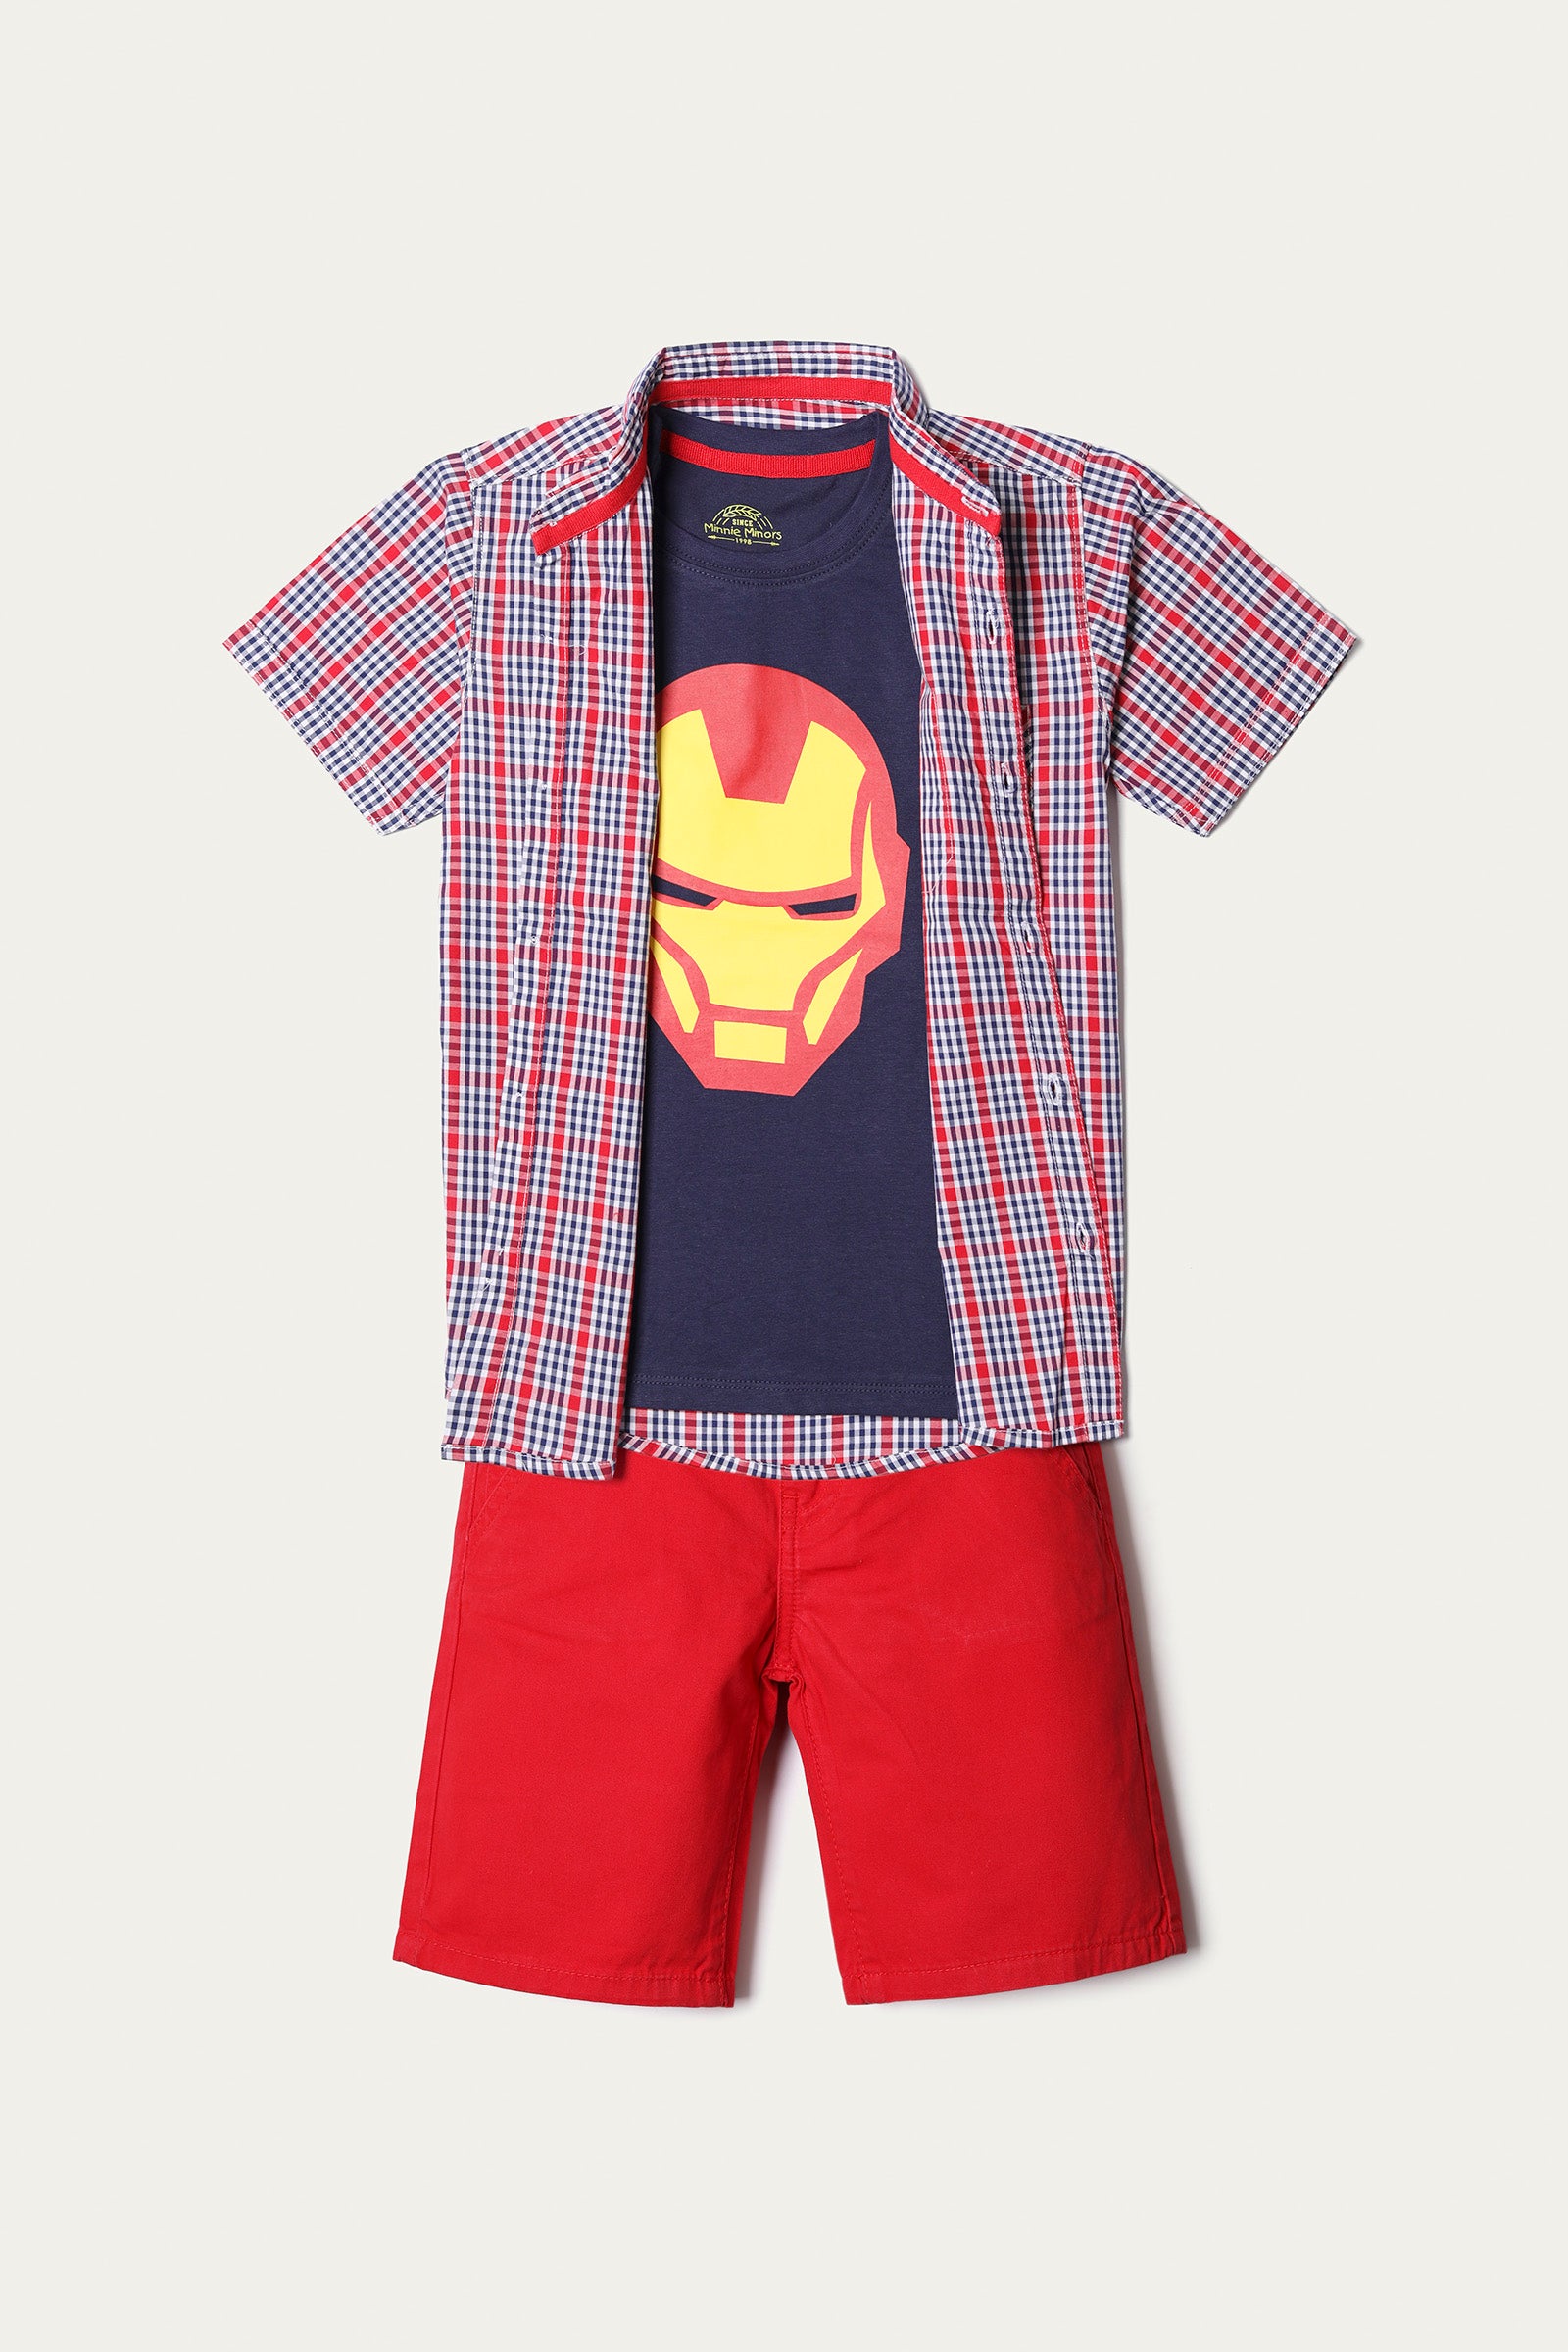 SHORT SLEEVE CHECKERED SHIRT WITH GRAPHIC T-SHIRT AND SHORTS (SST-133)